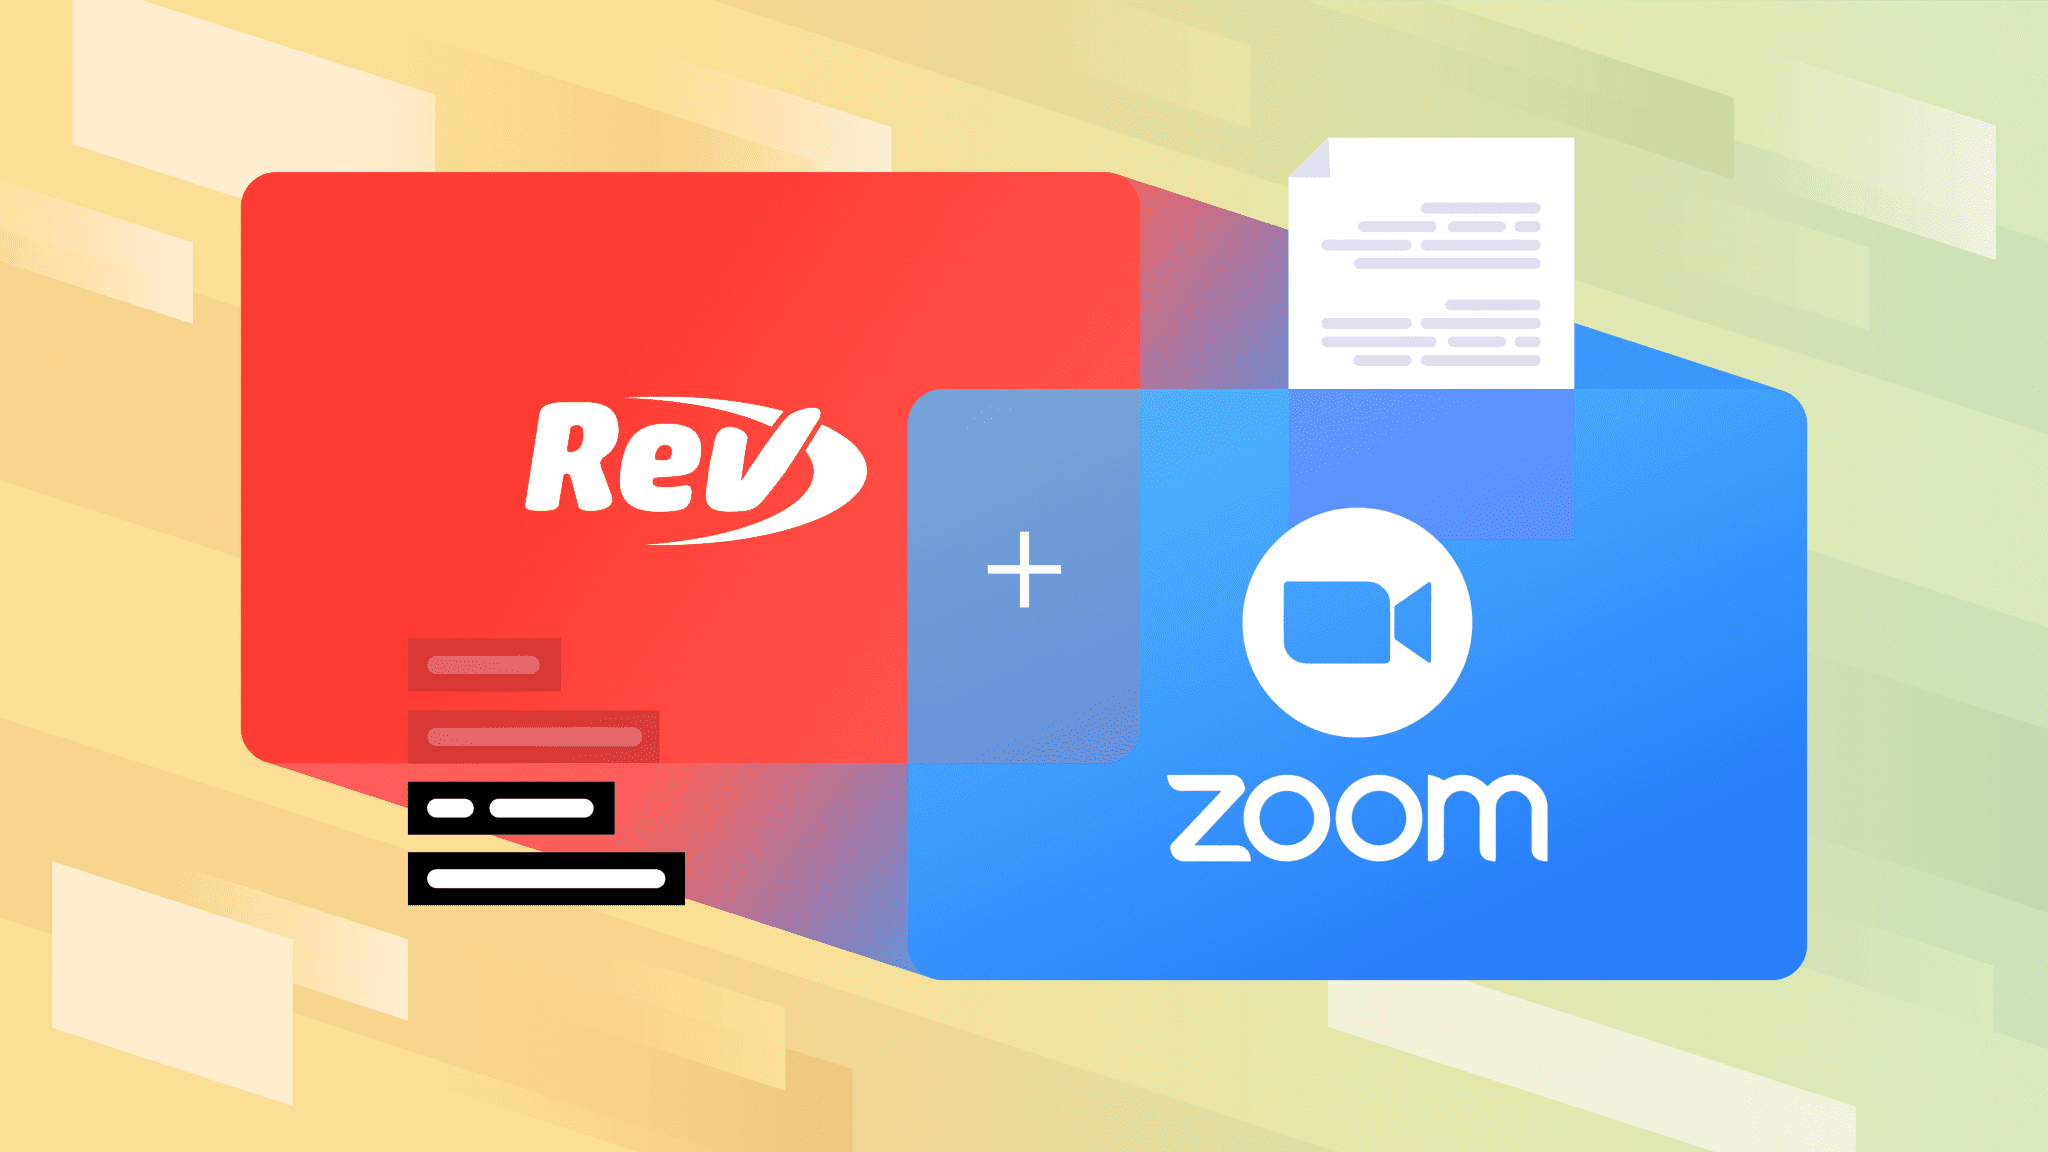 Image of Rev and Zoom logos melding together